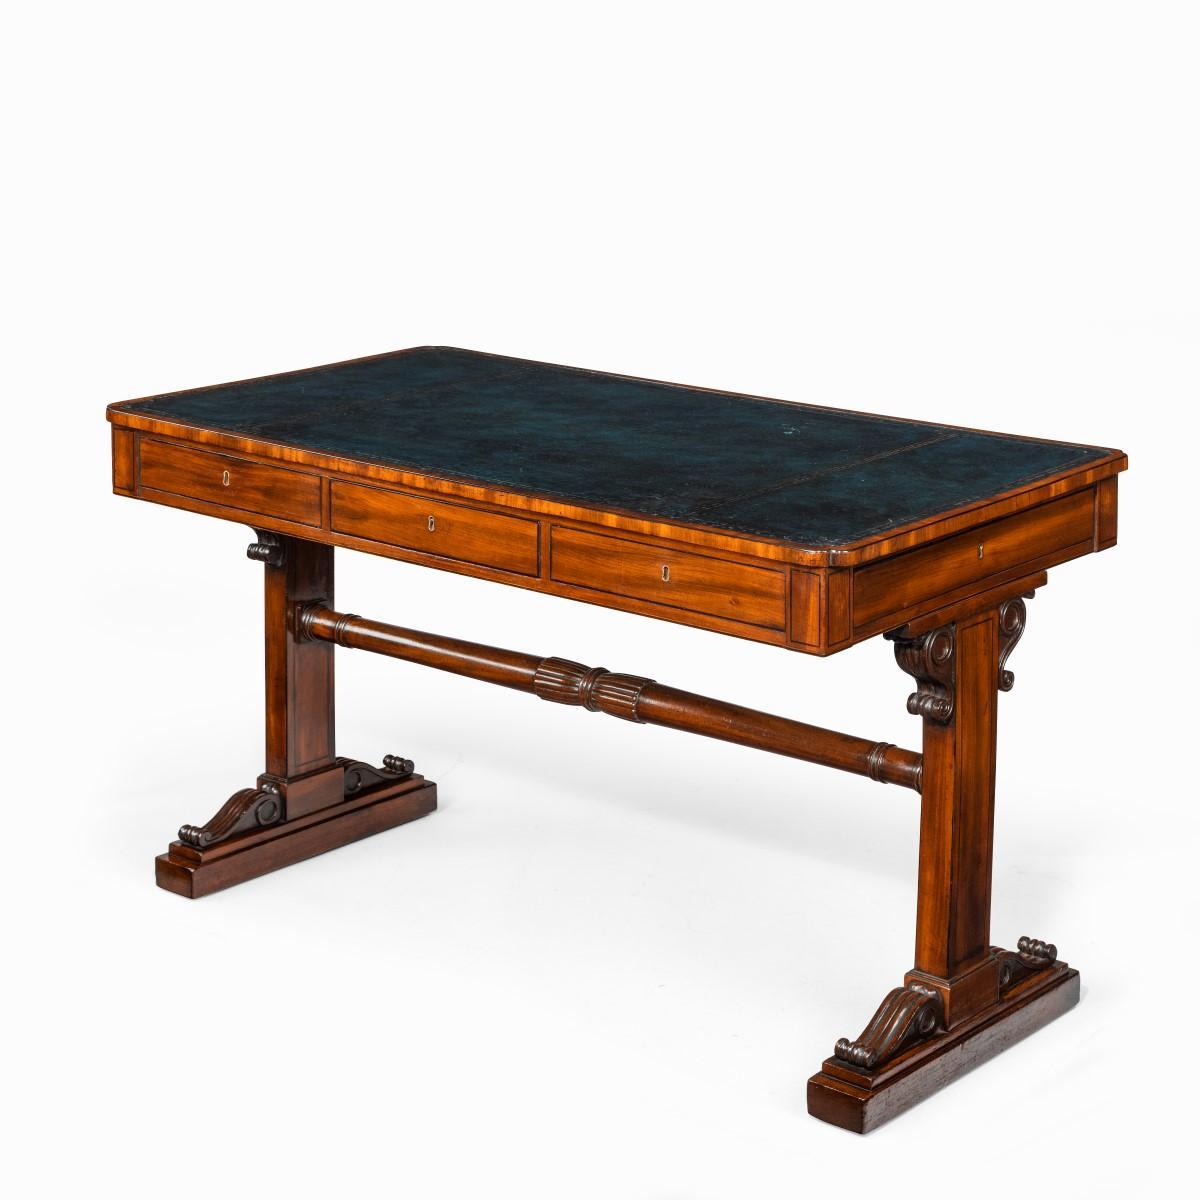 A Regency mahogany end support library table, the rectangular top extensively inset in tooled leather above a frieze with drawers opening on all four sides, the solid rectangular supports with bold scrolling corbels and joined by a turned, tapering